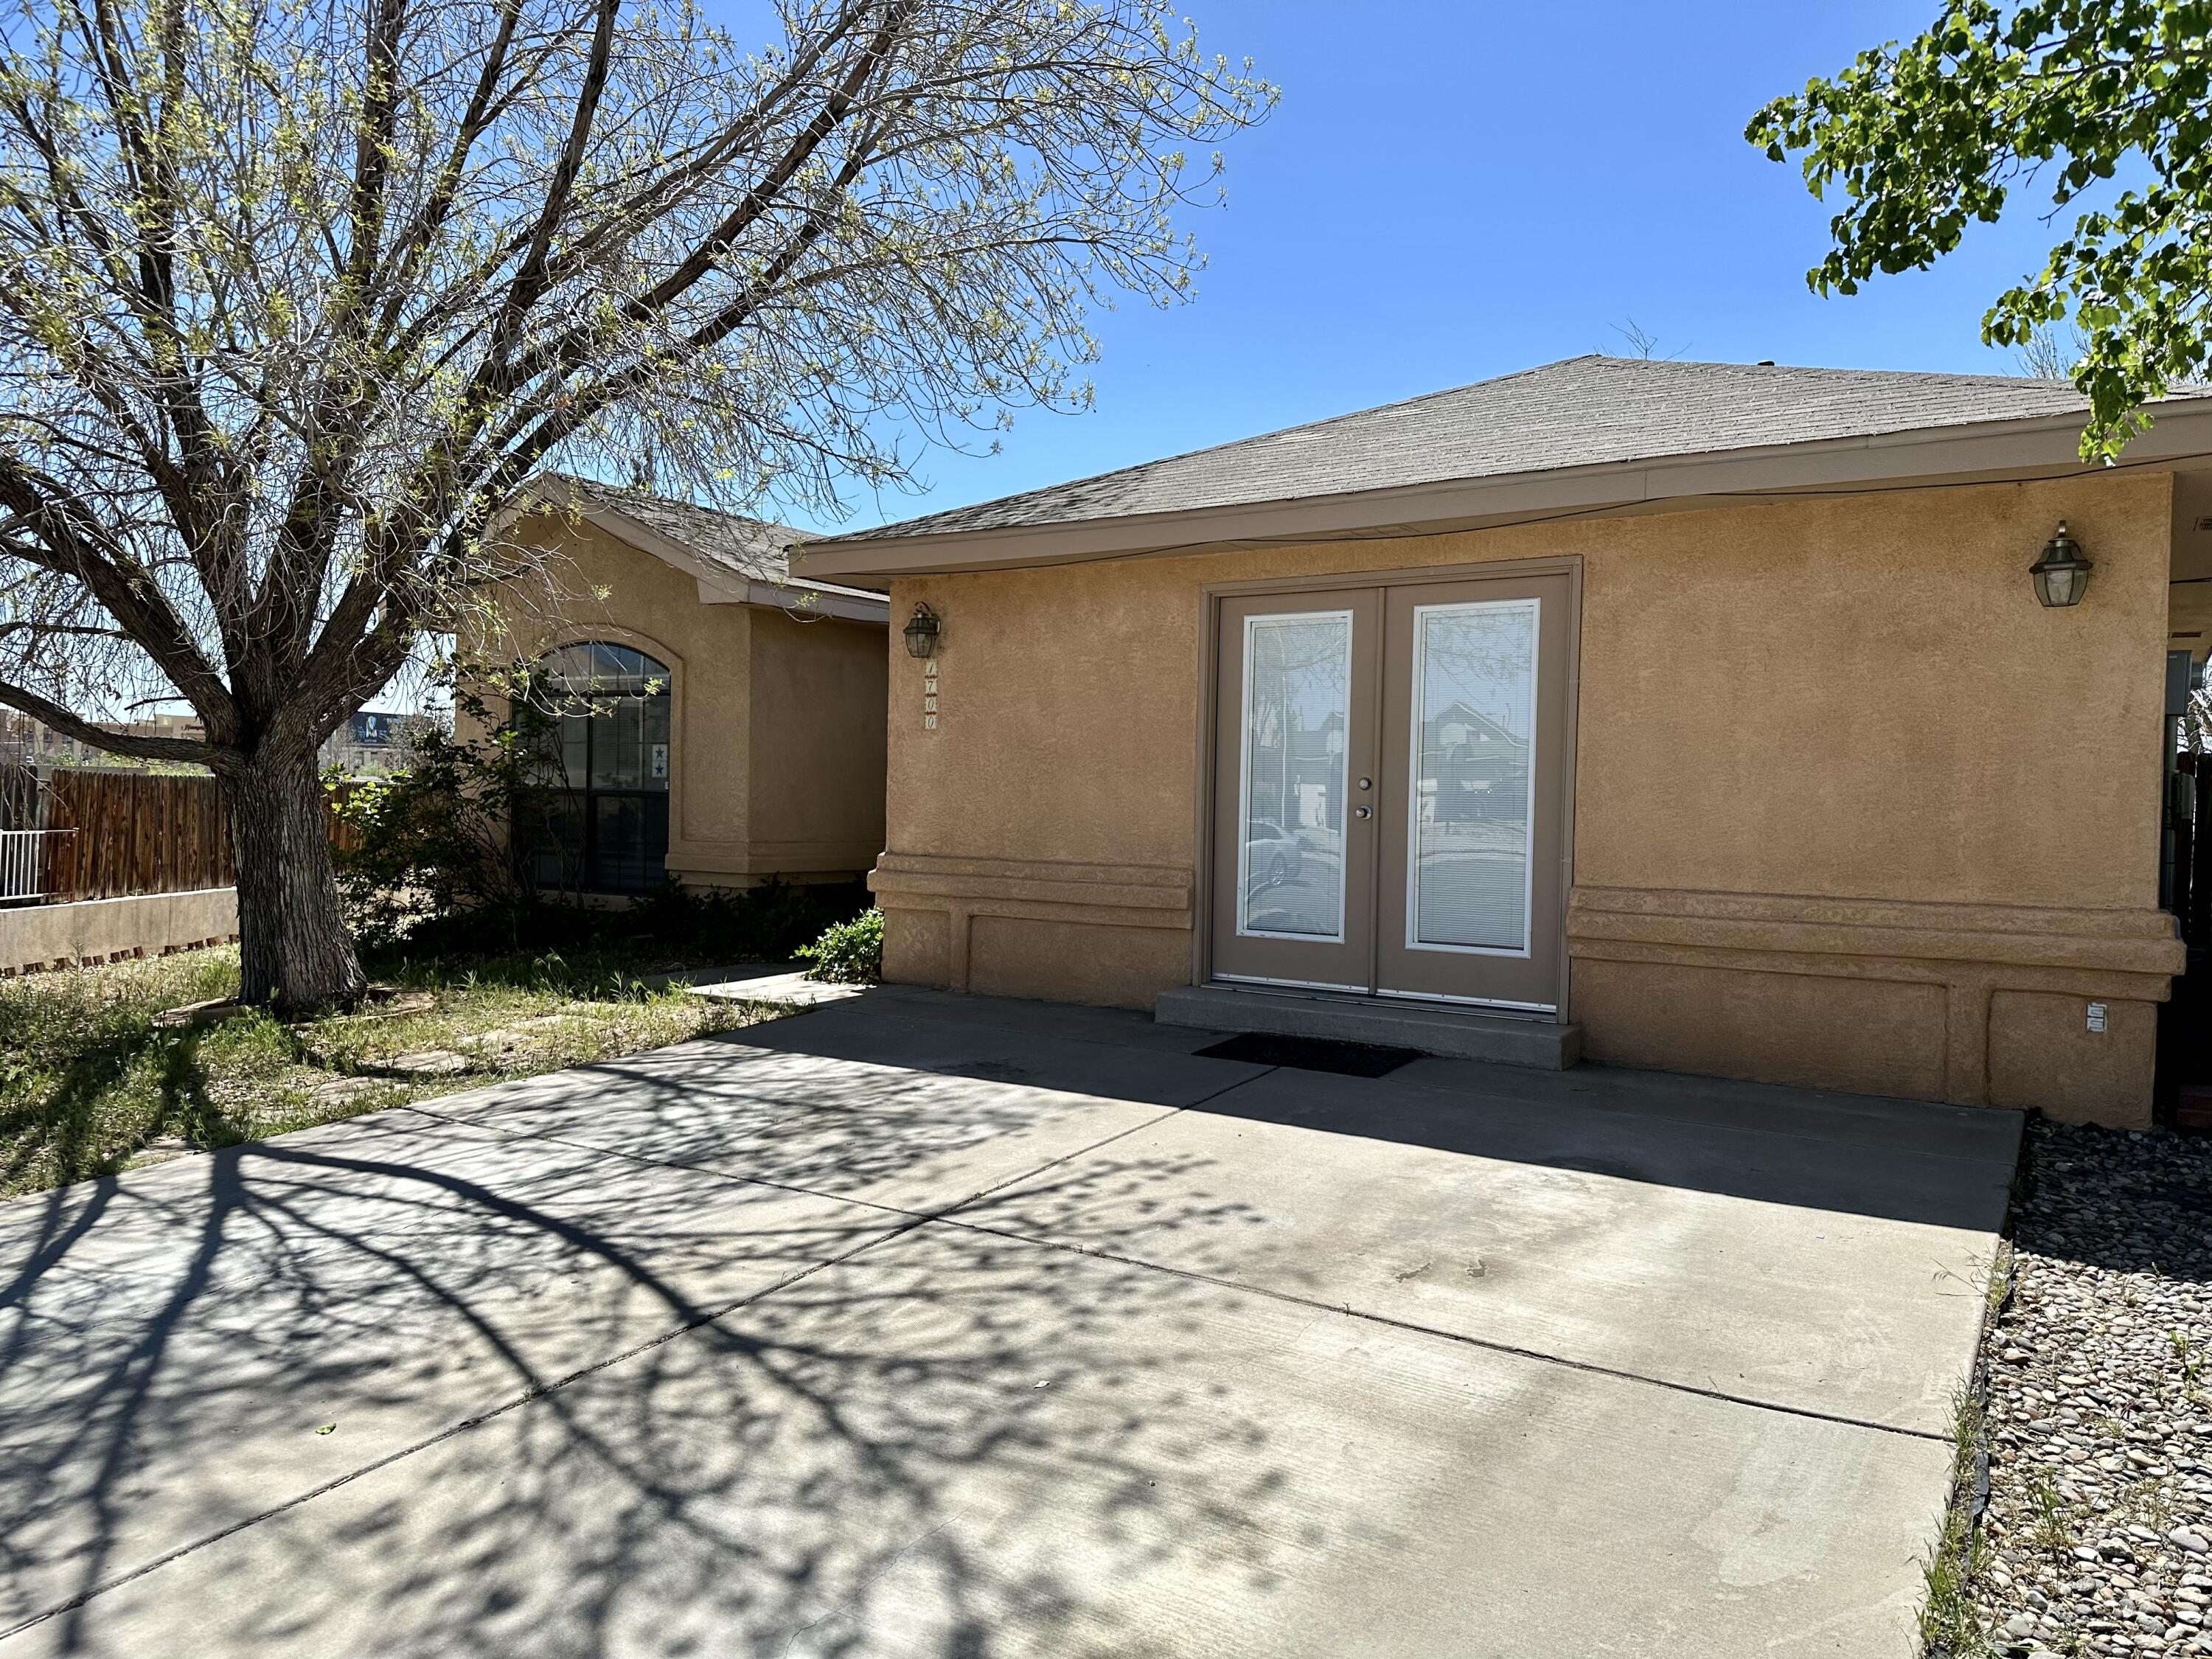 Wonderful west side home has 3 bedrooms, 2 bathrooms and 2 living areas! New paint in bedrooms and main living area and new carpet in bedroom. Easy access to freeway, close distance to restaurants, shopping and schools. Come check this cozy home out before it is gone!